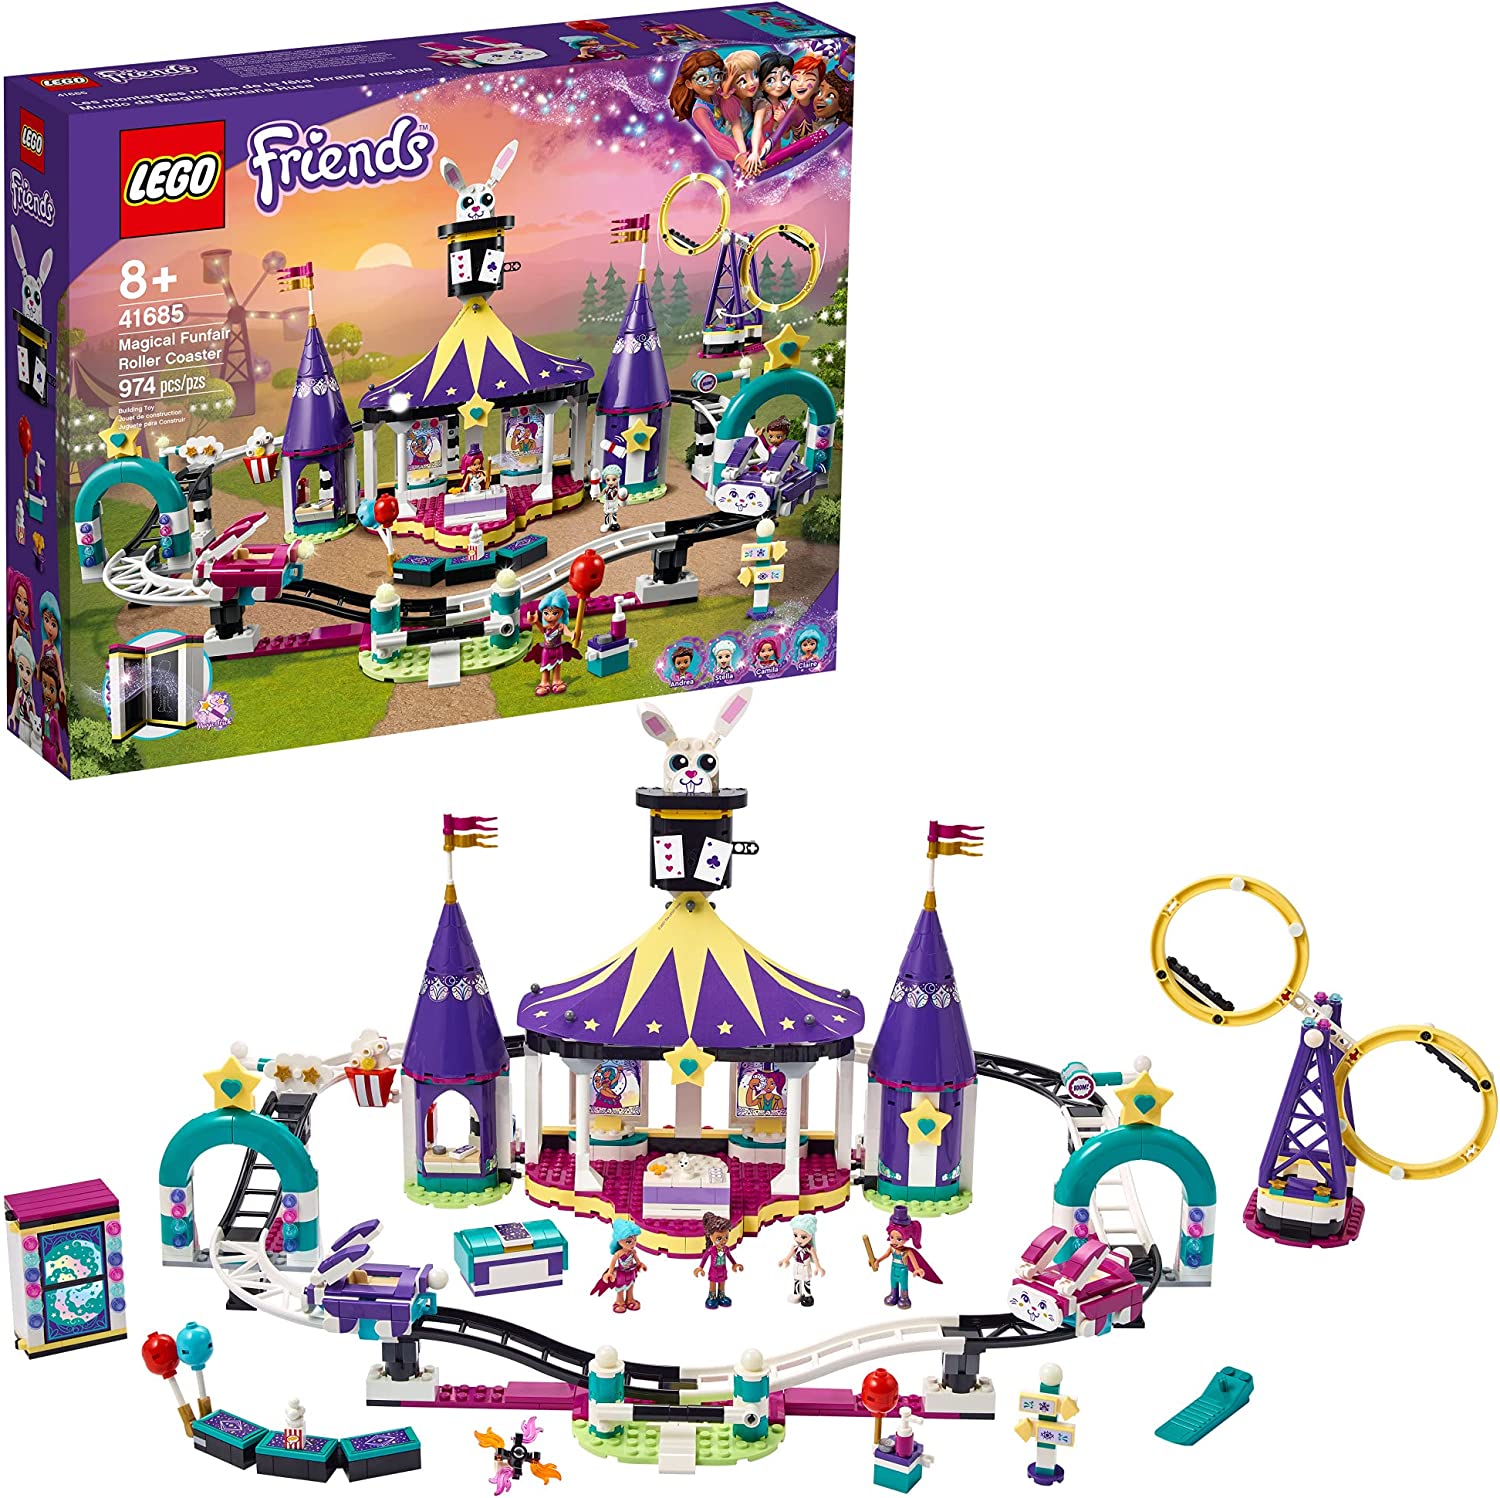 Lego Magical Funfair Roller Coaster Building Toy - ANB Baby -$75 - $100